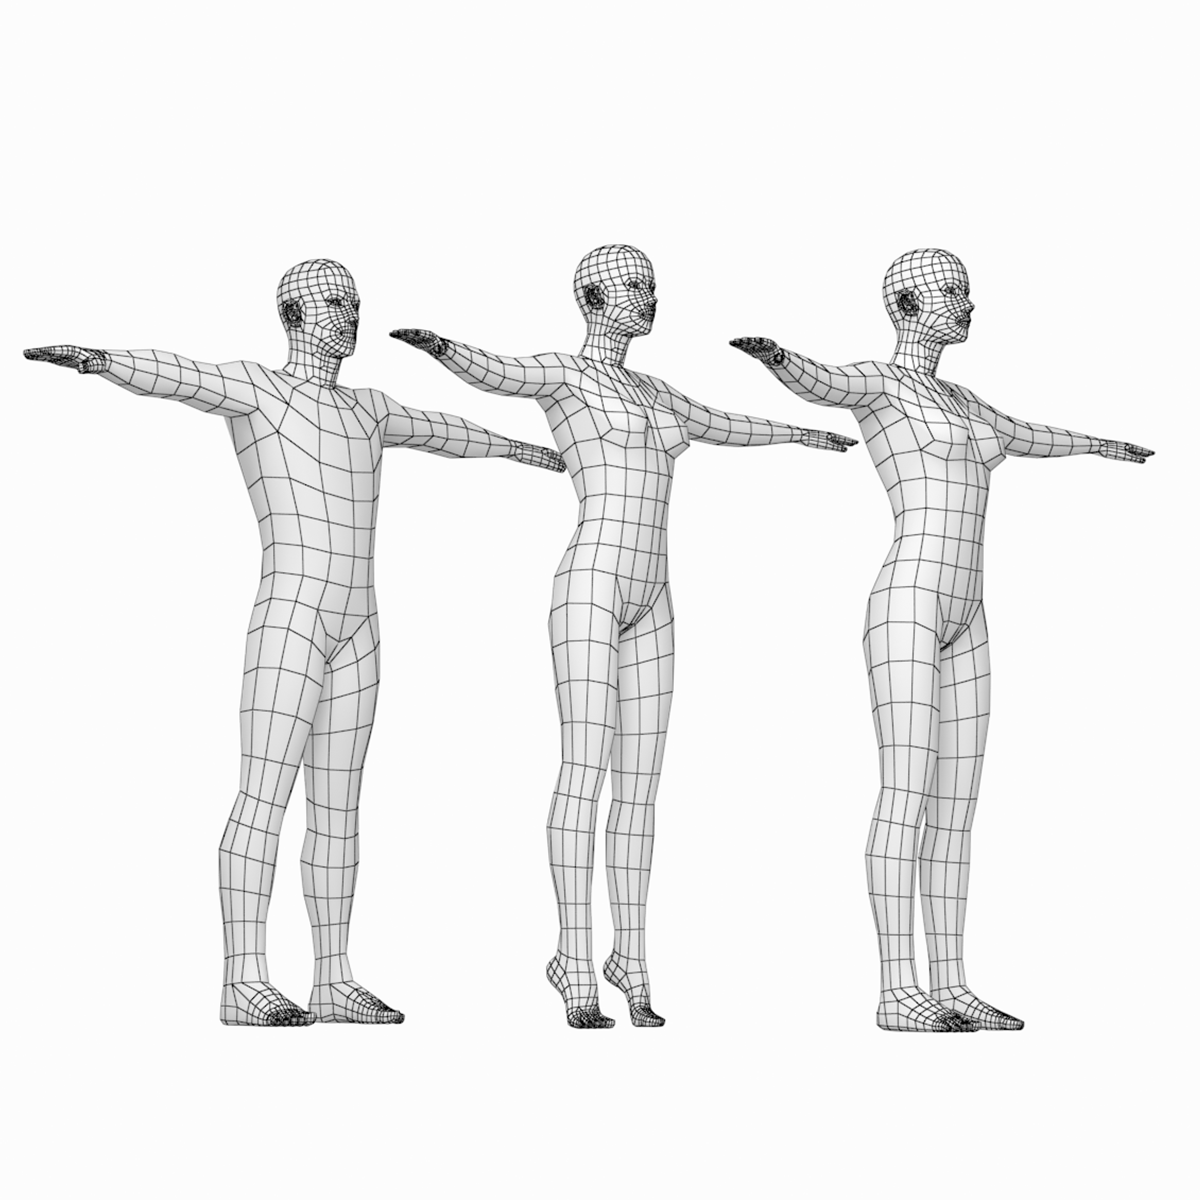 Make any 3D Model into a T Pose - Using Blender 